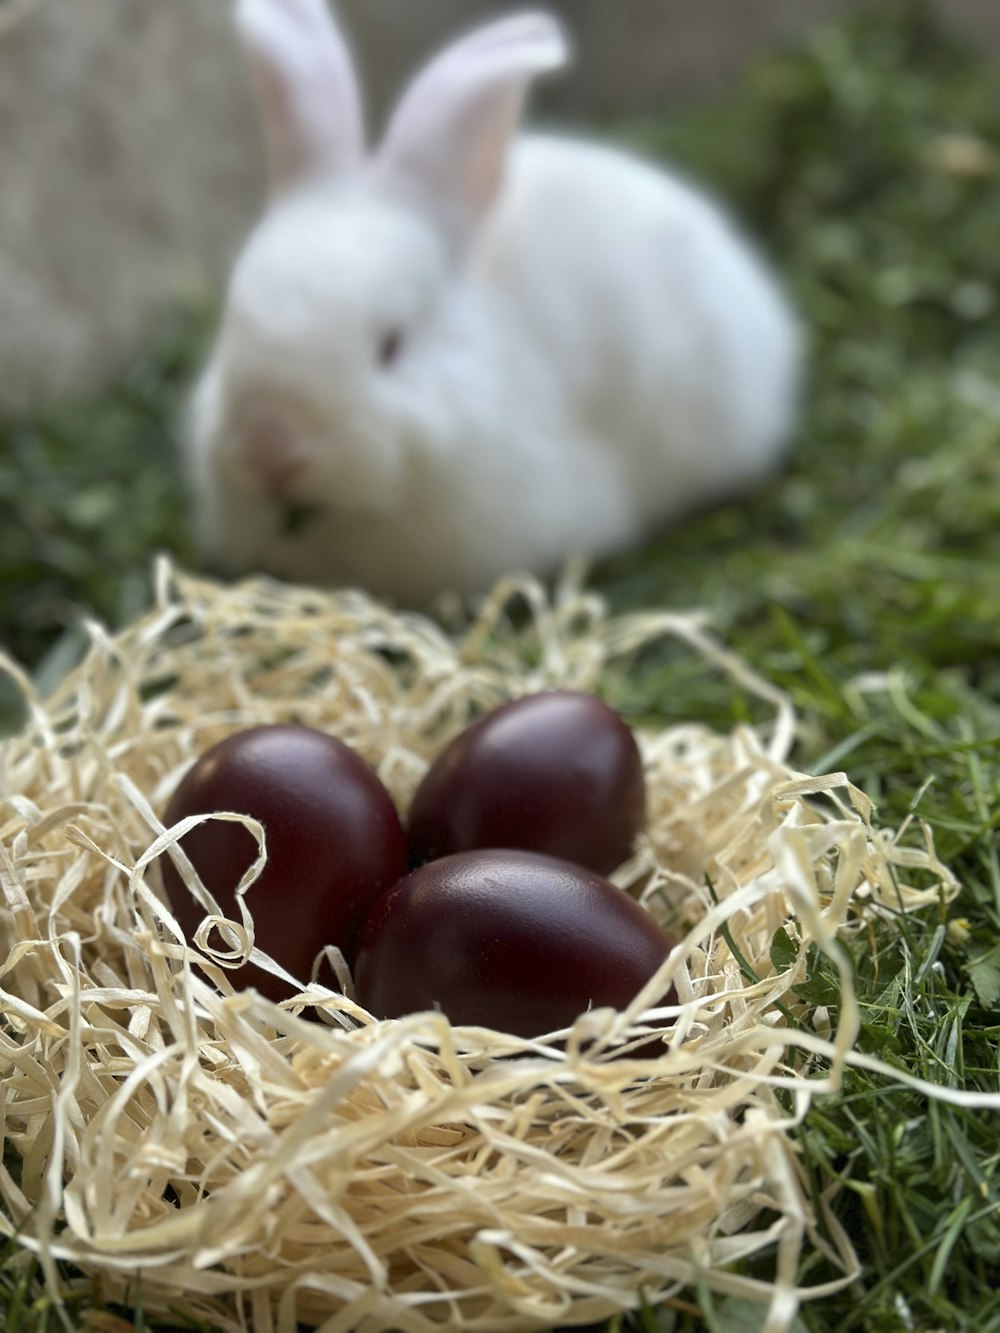 a white rabbit sitting next to three eggs in a nest